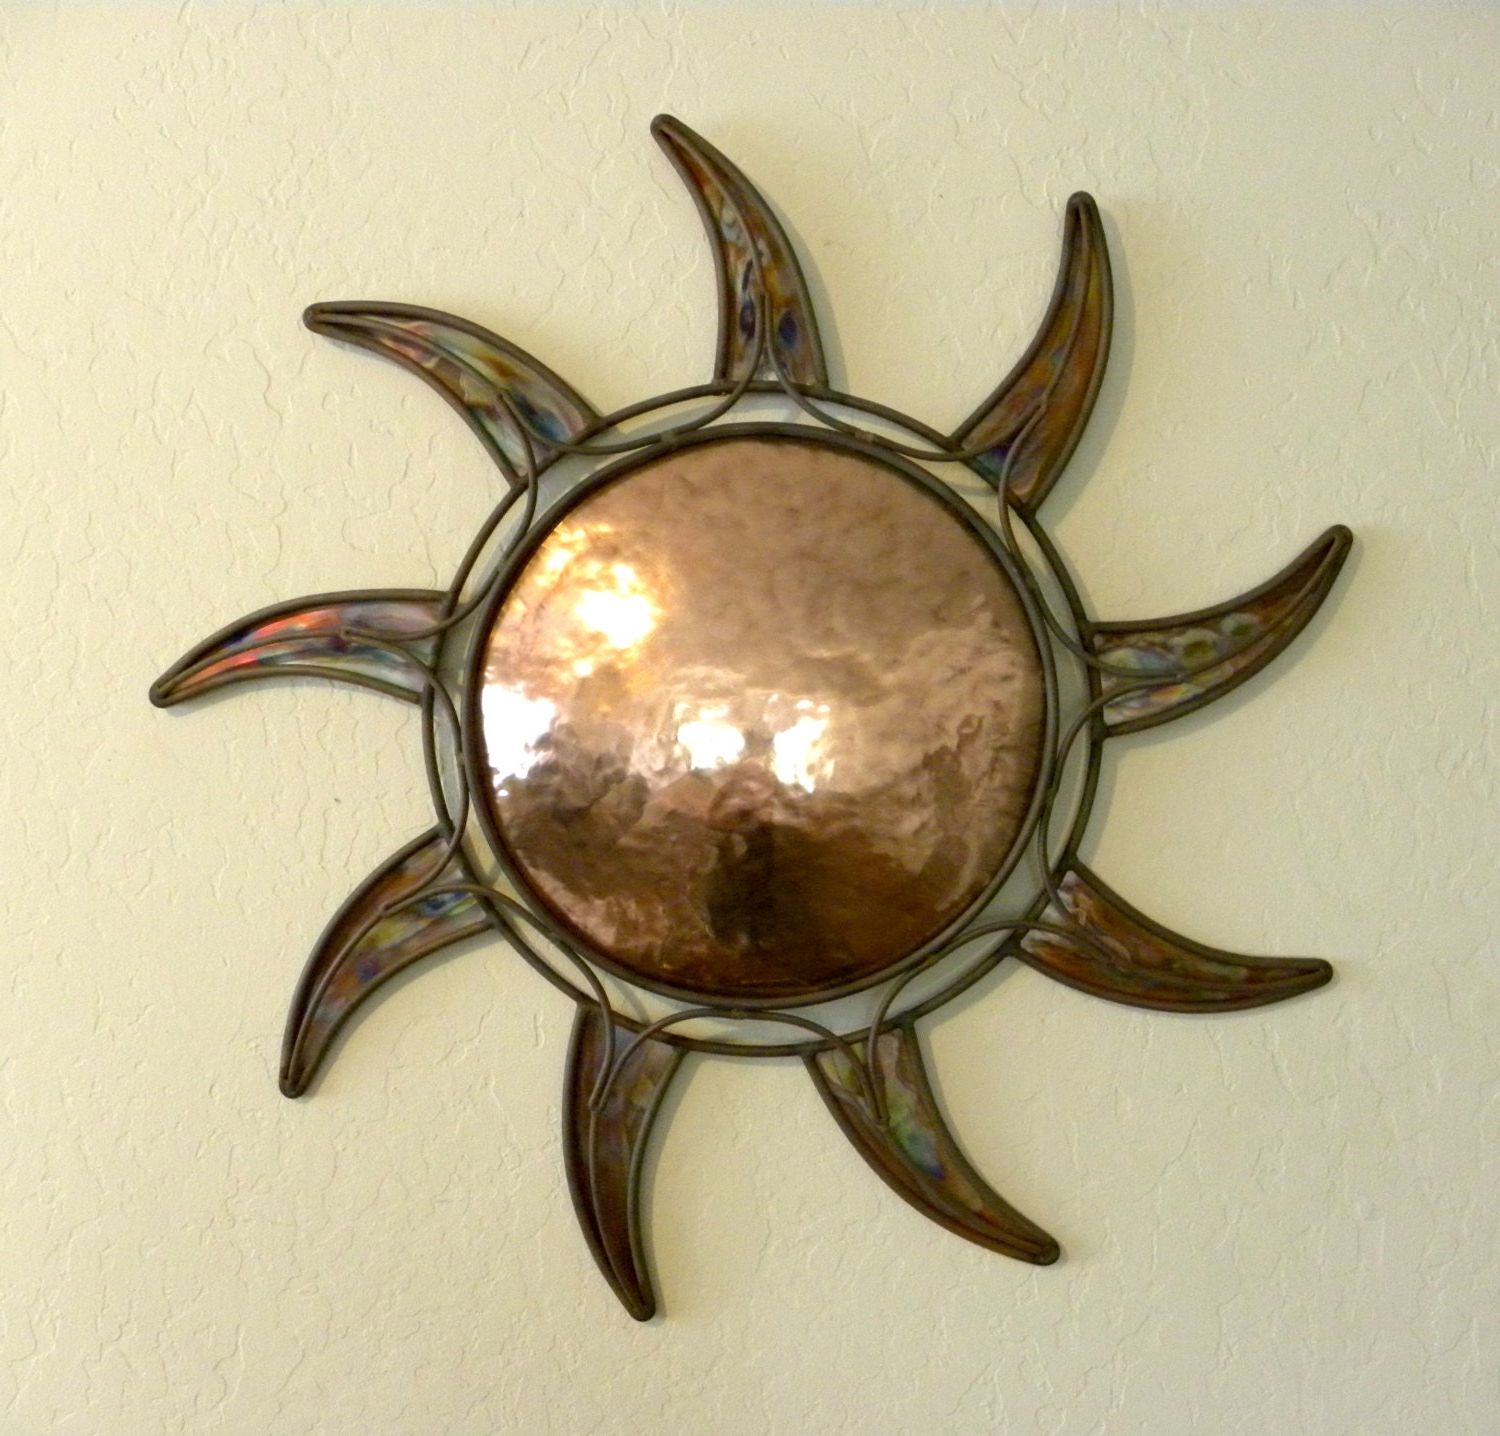 Well Liked Sun Wall Art Intended For Copper Sun Wall Art Home Decor (View 17 of 20)